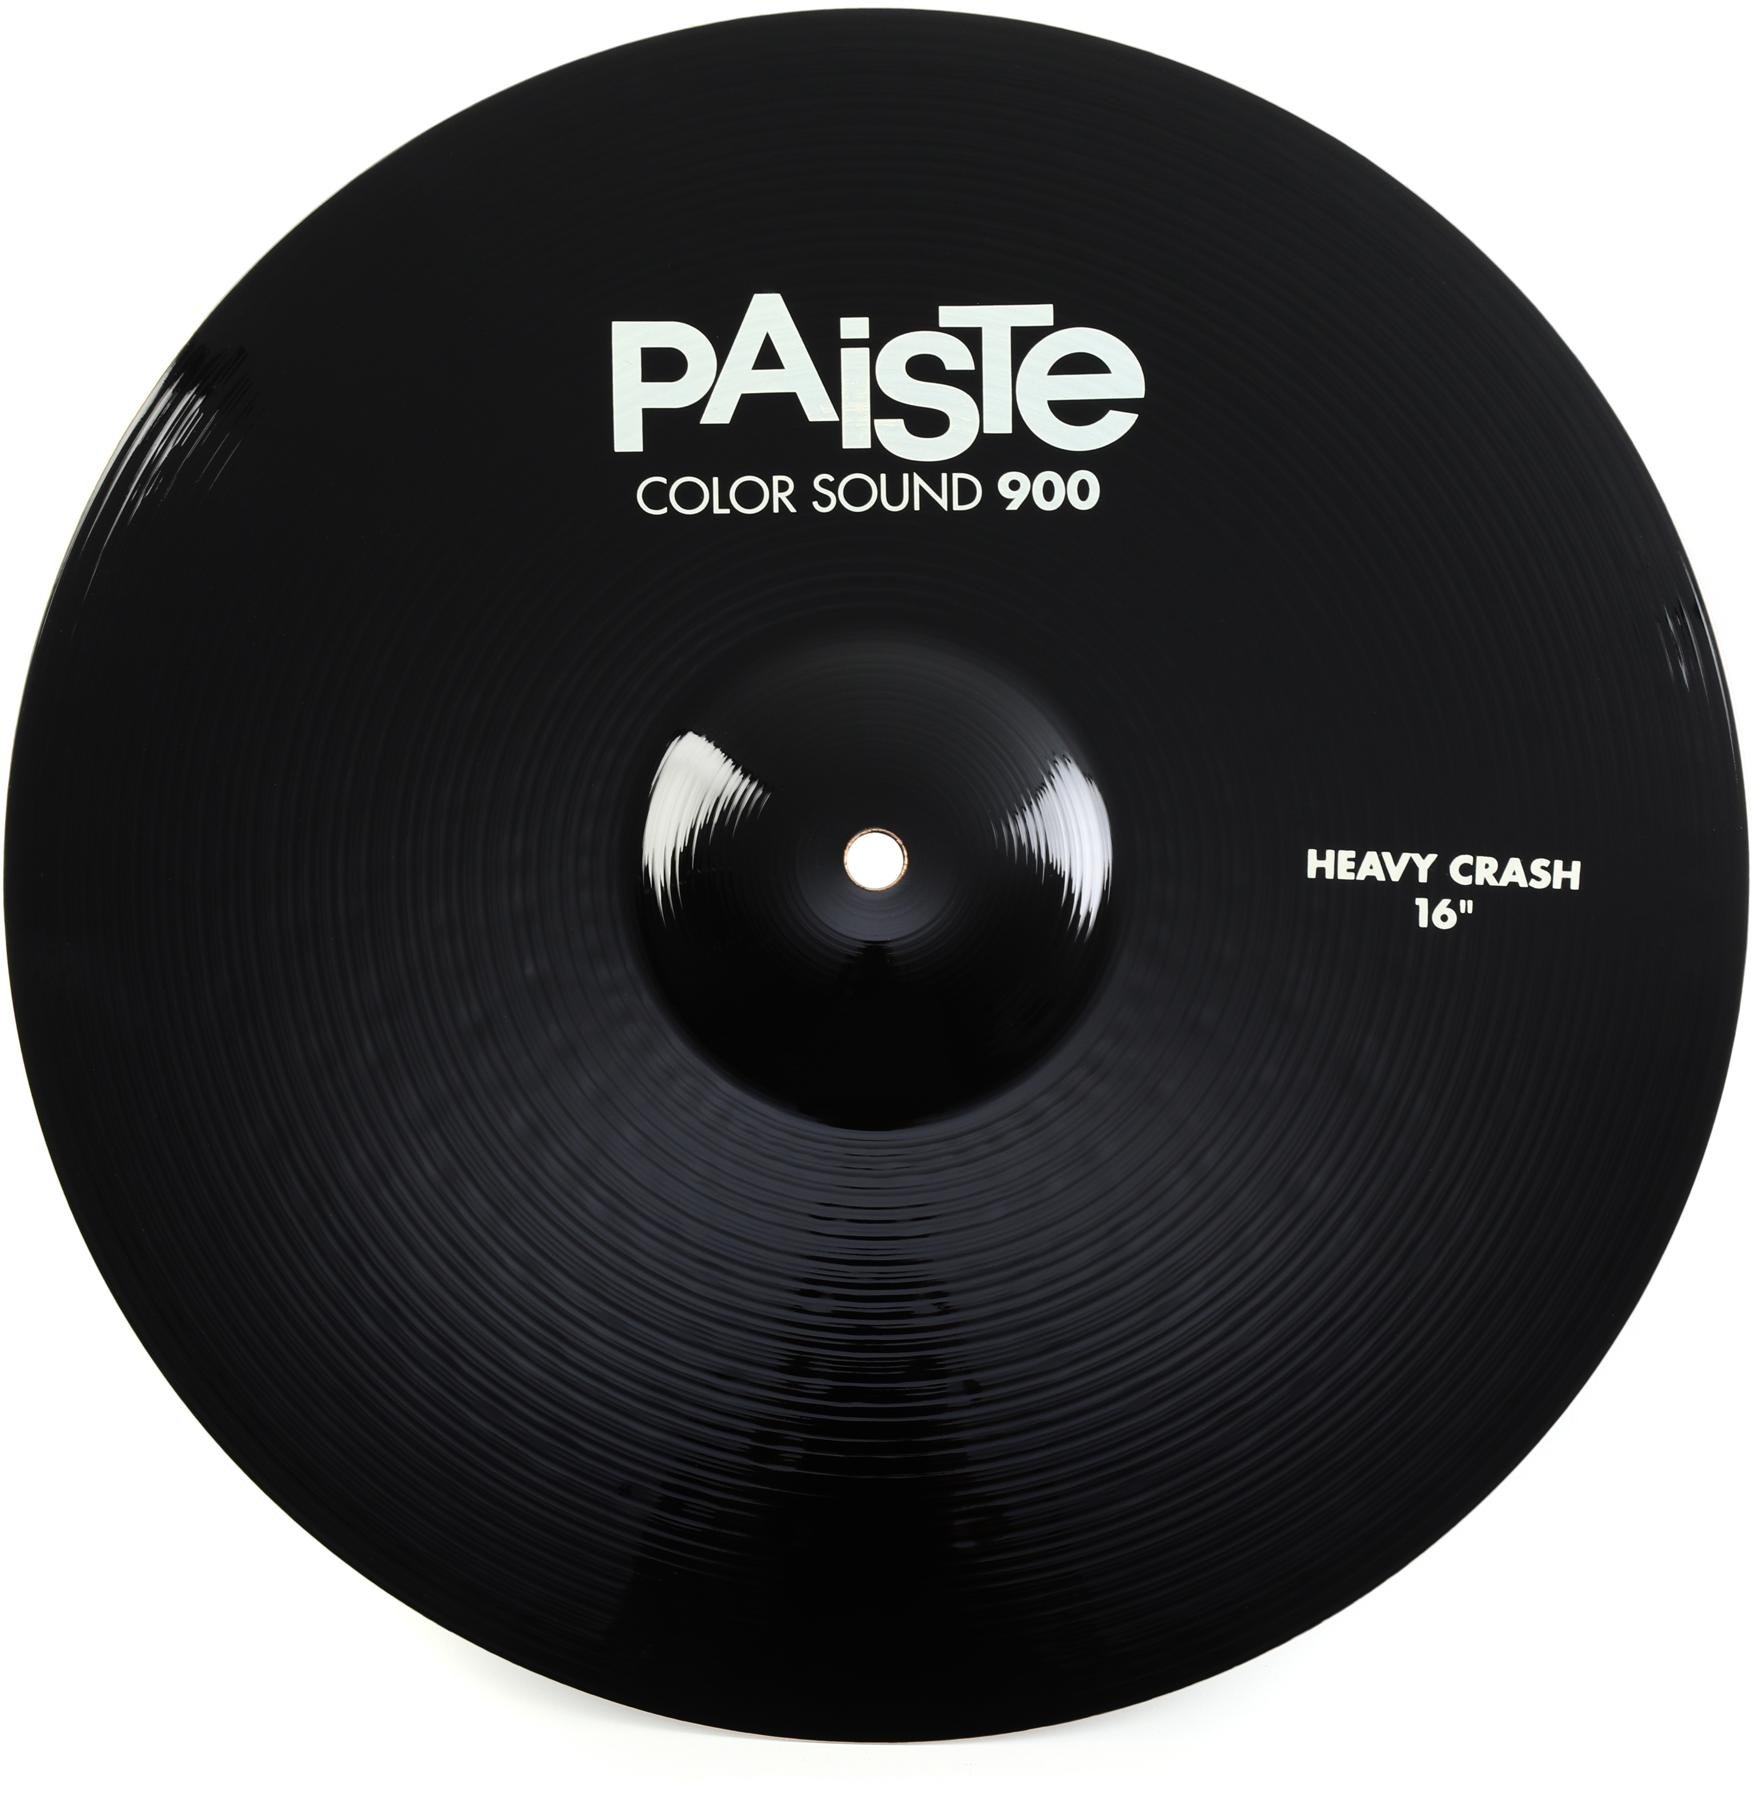 Paiste 16 inch Color Sound 900 Heavy Crash Cymbal | Sweetwater